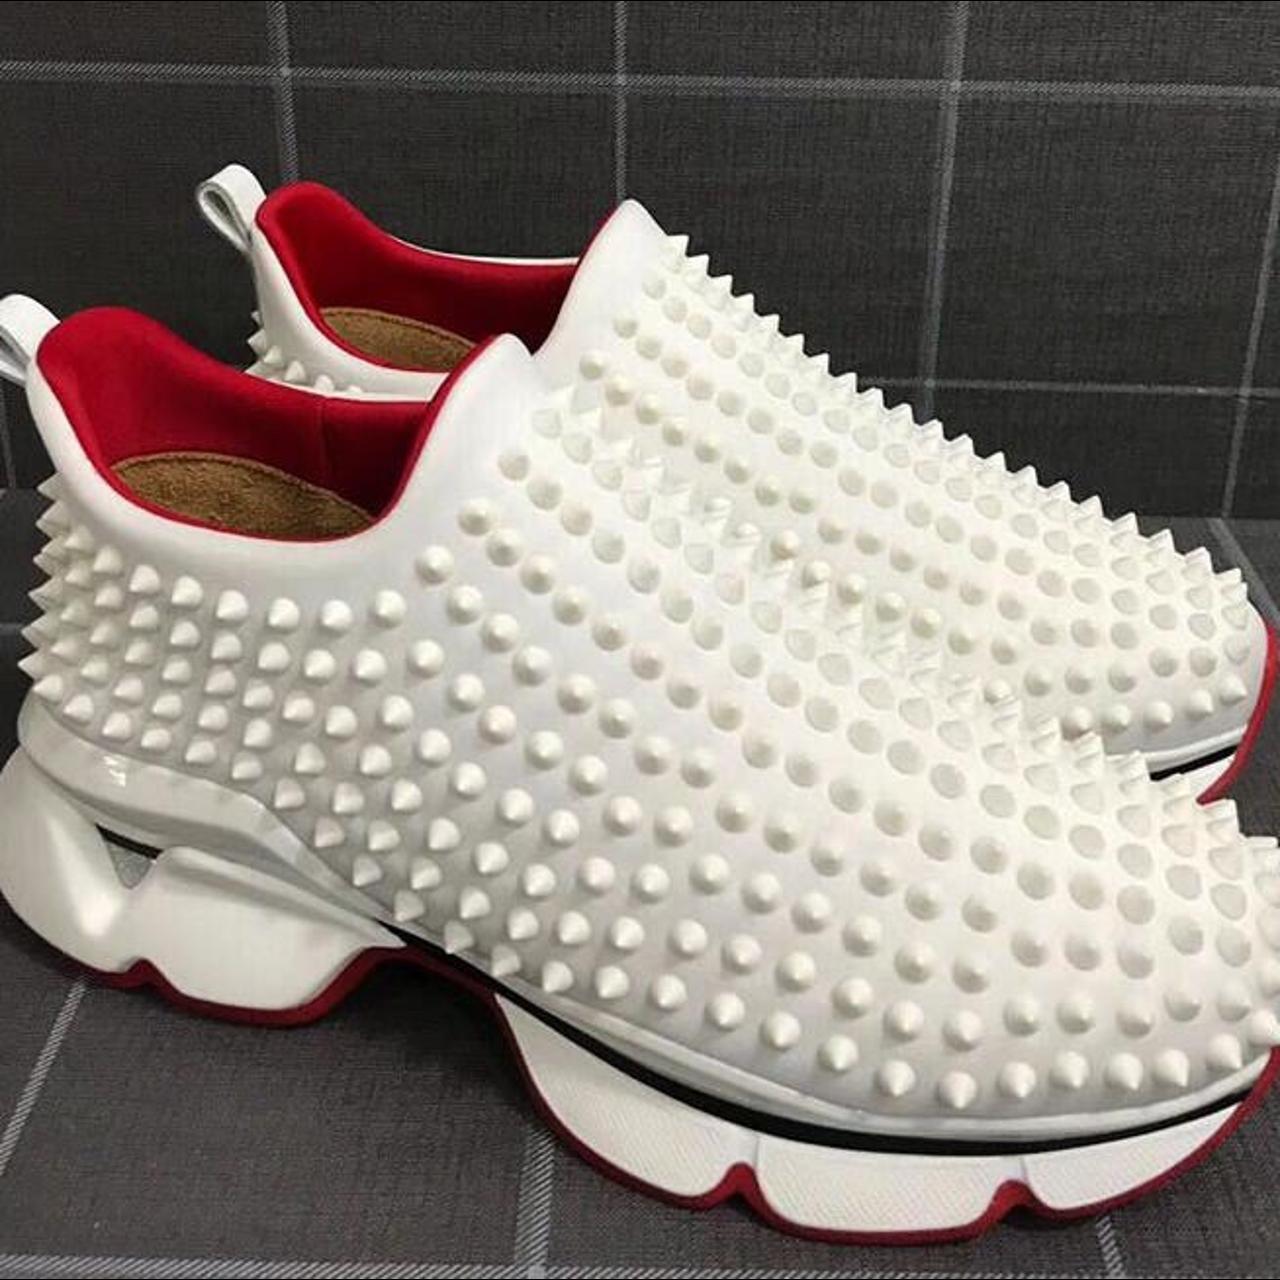 Christian louboutins red suede spiked flatbottom. - Depop